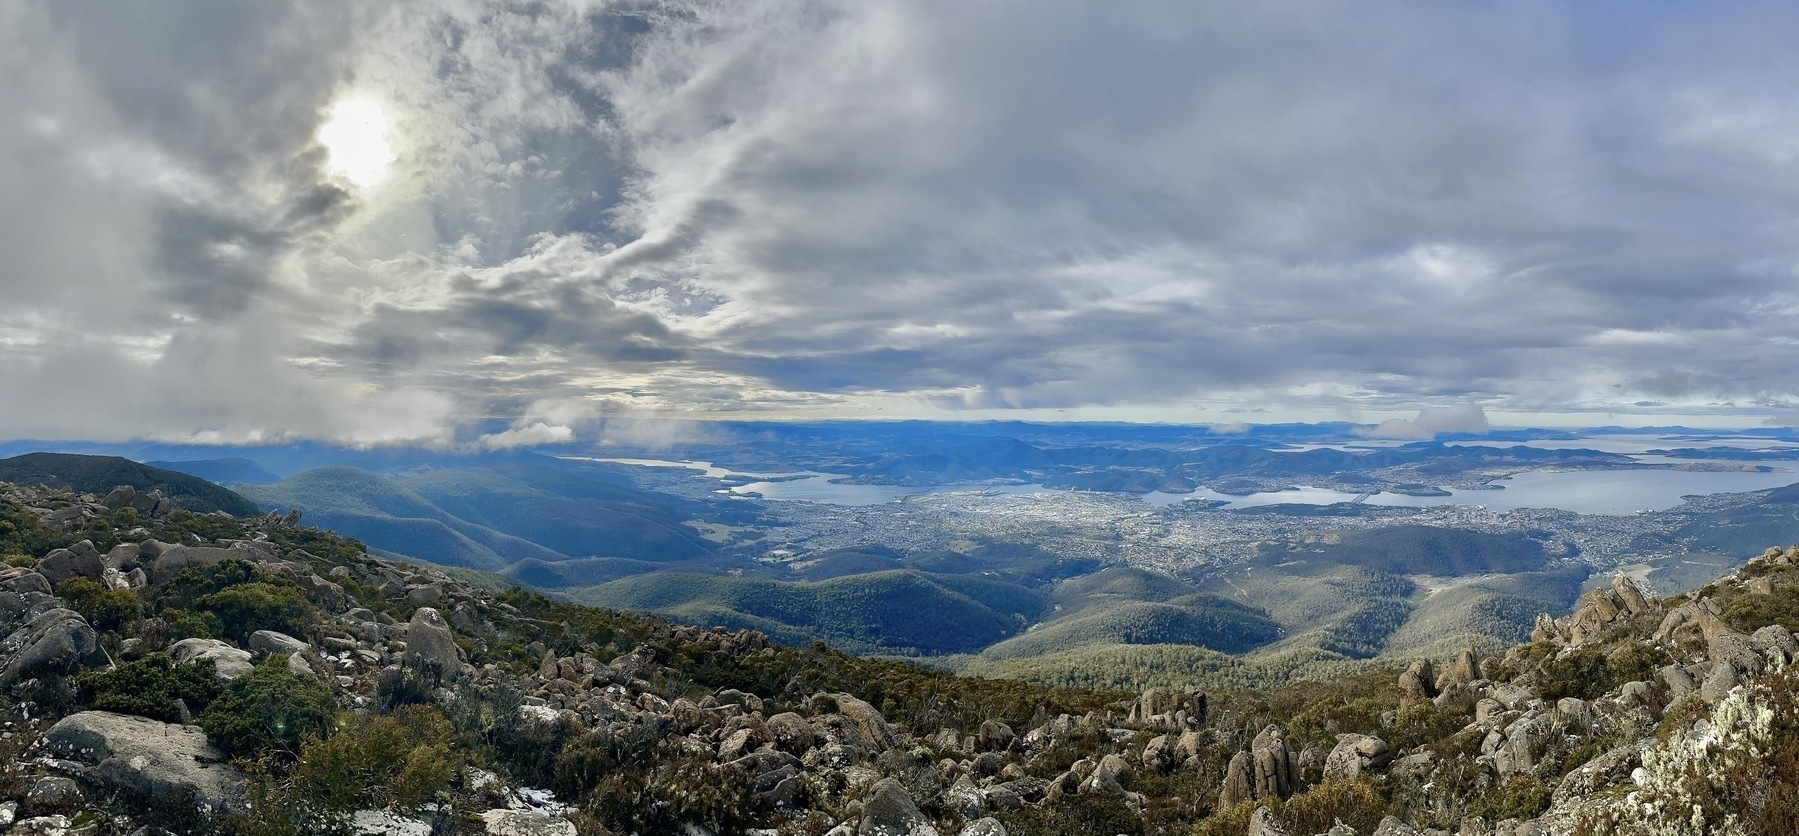 Looking out across Hobart from the top of Kunanyi (Mount Wellington).